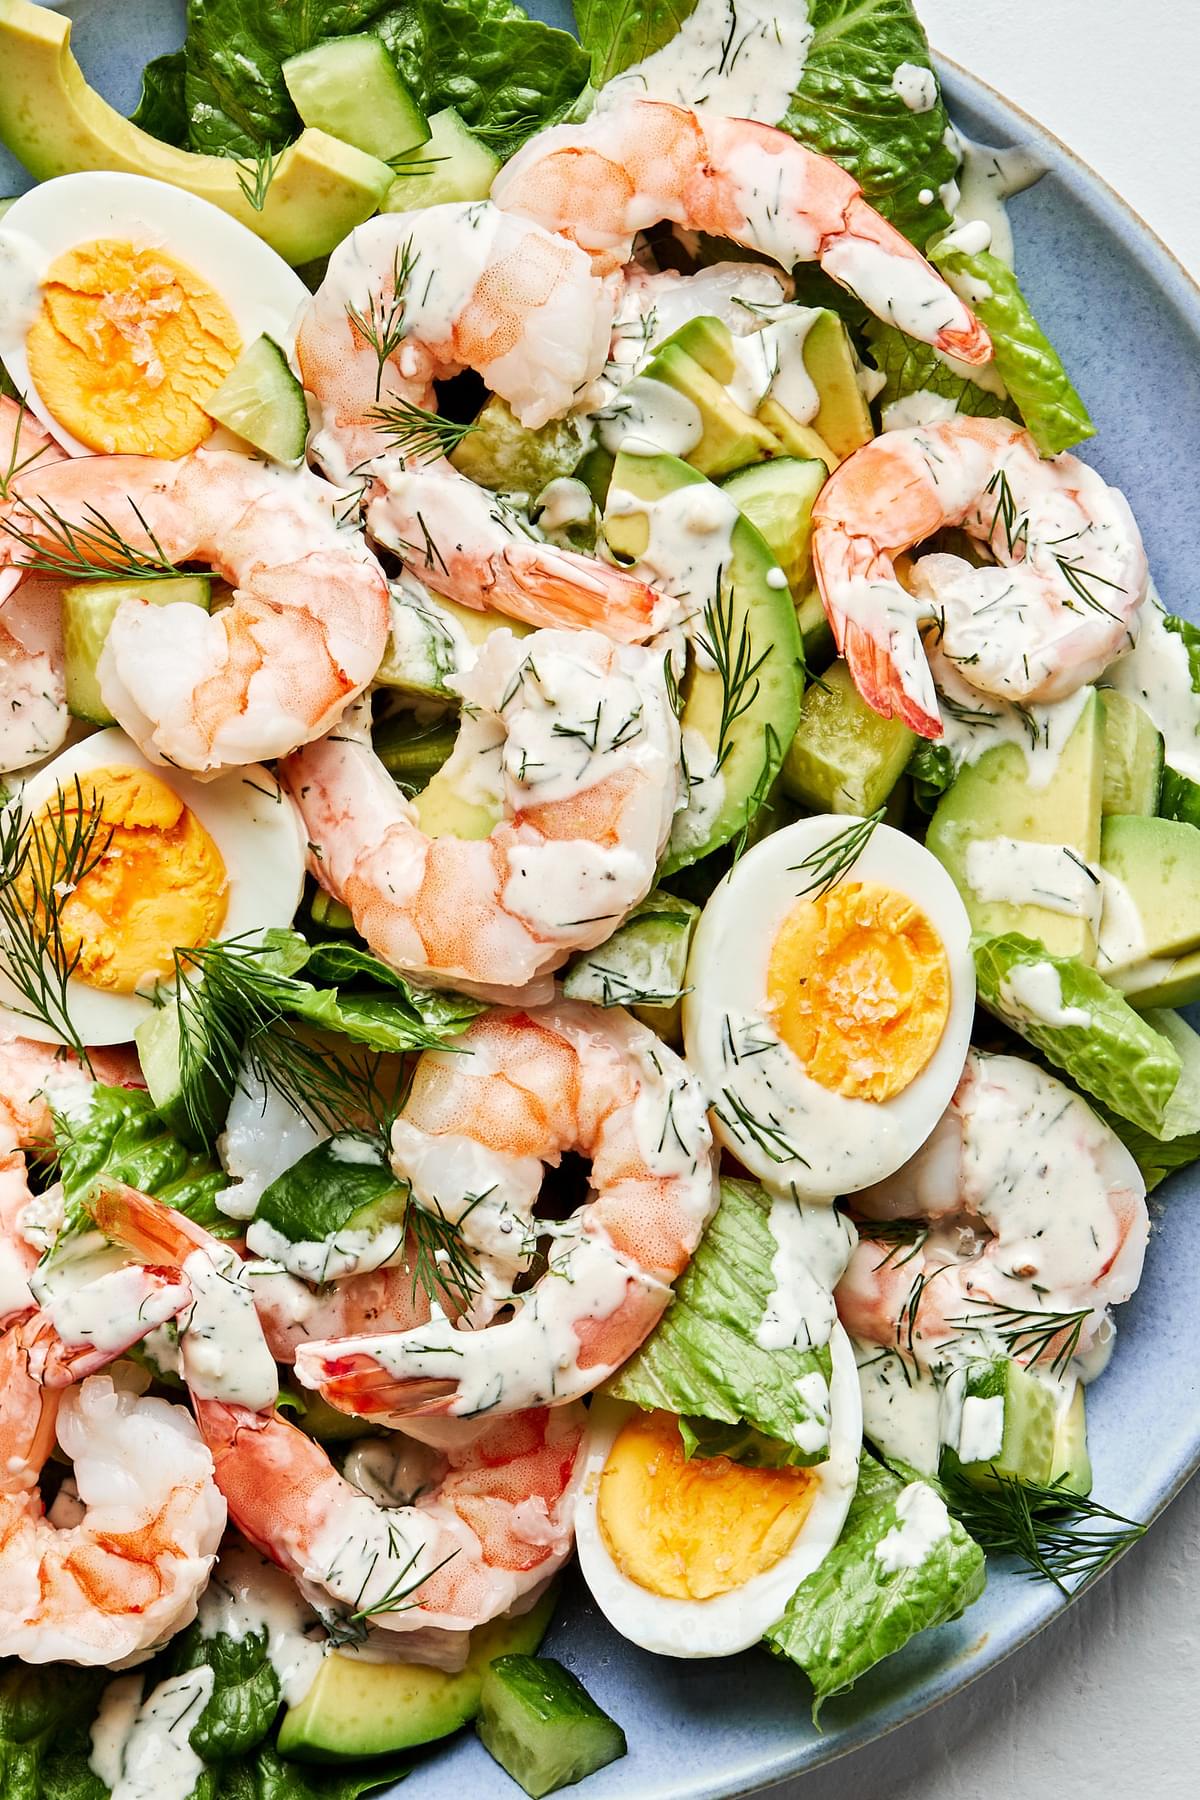 shrimp and avocado salad topped with boiled eggs, homemade dill dressing and flaky salt